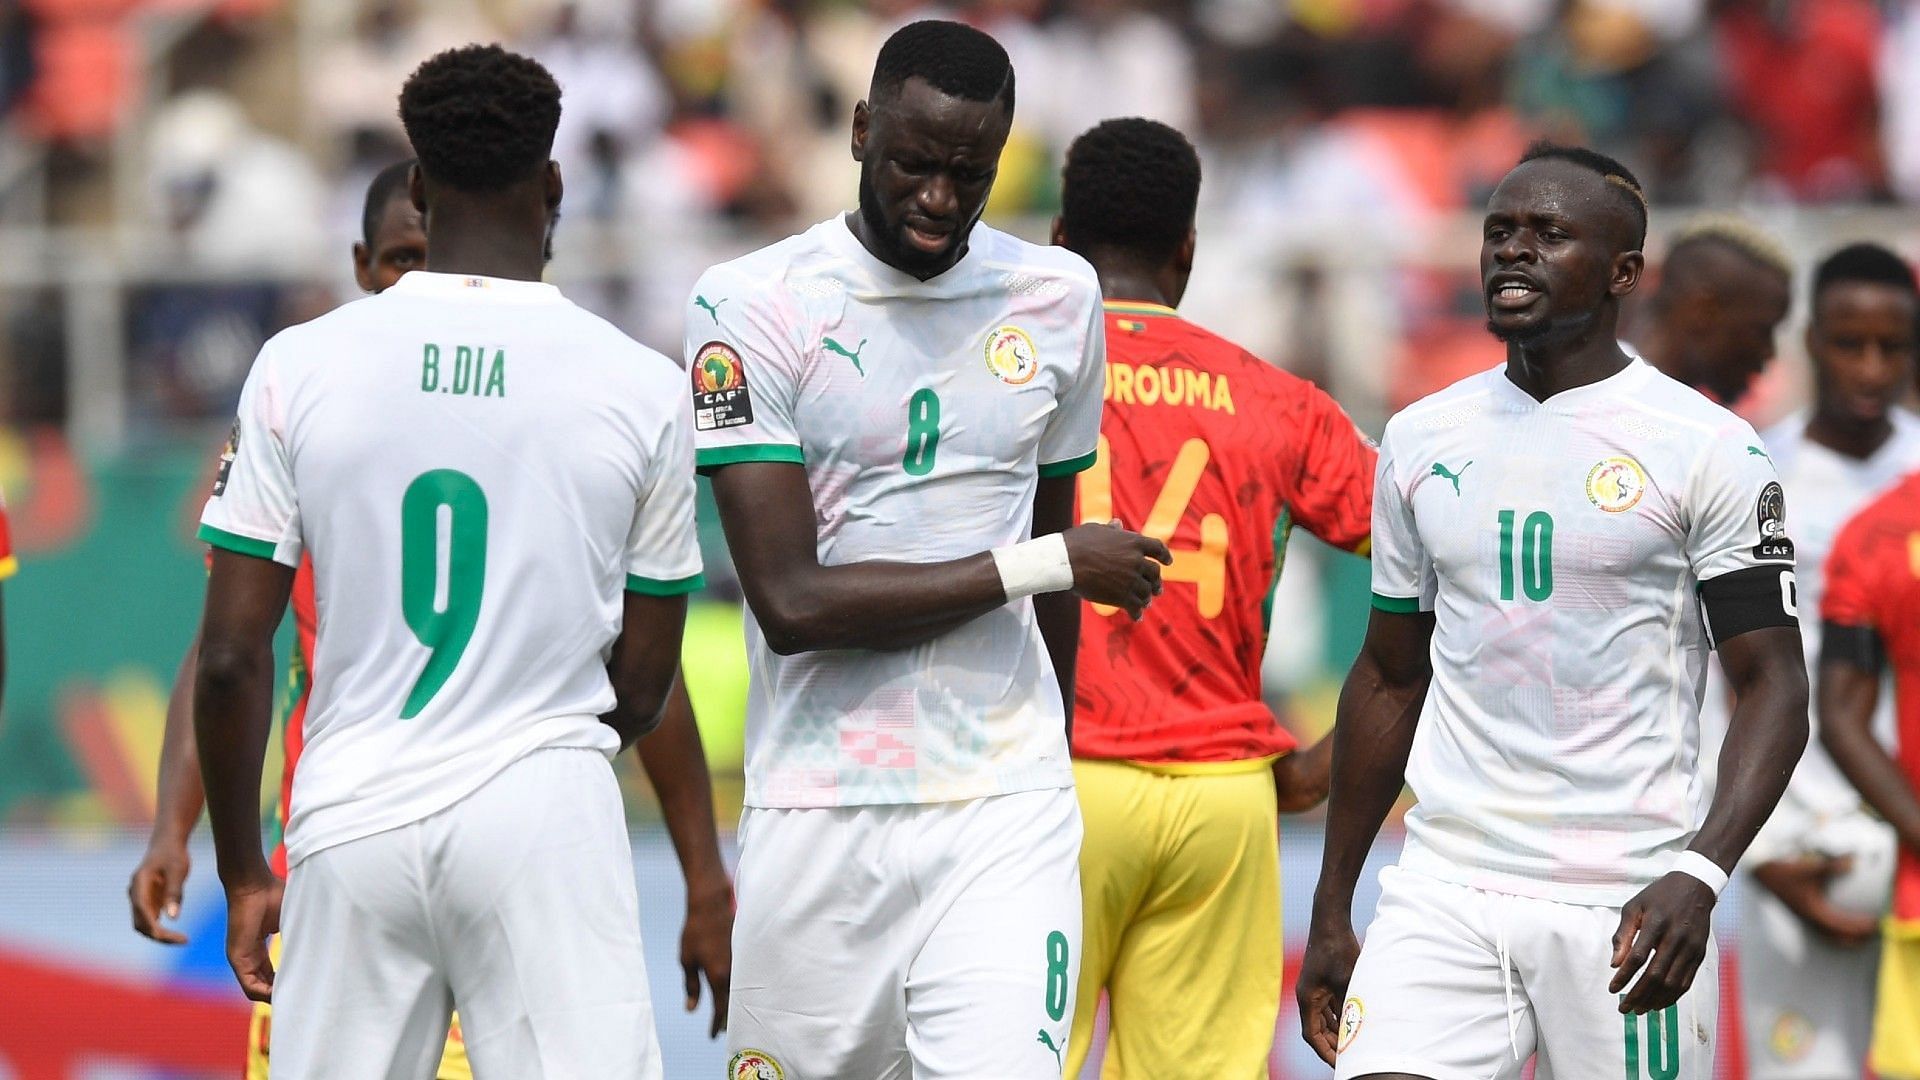 Senegal and Burkina Faso lock horns in the first semi-final of the 2021 AFCON on Wednesday